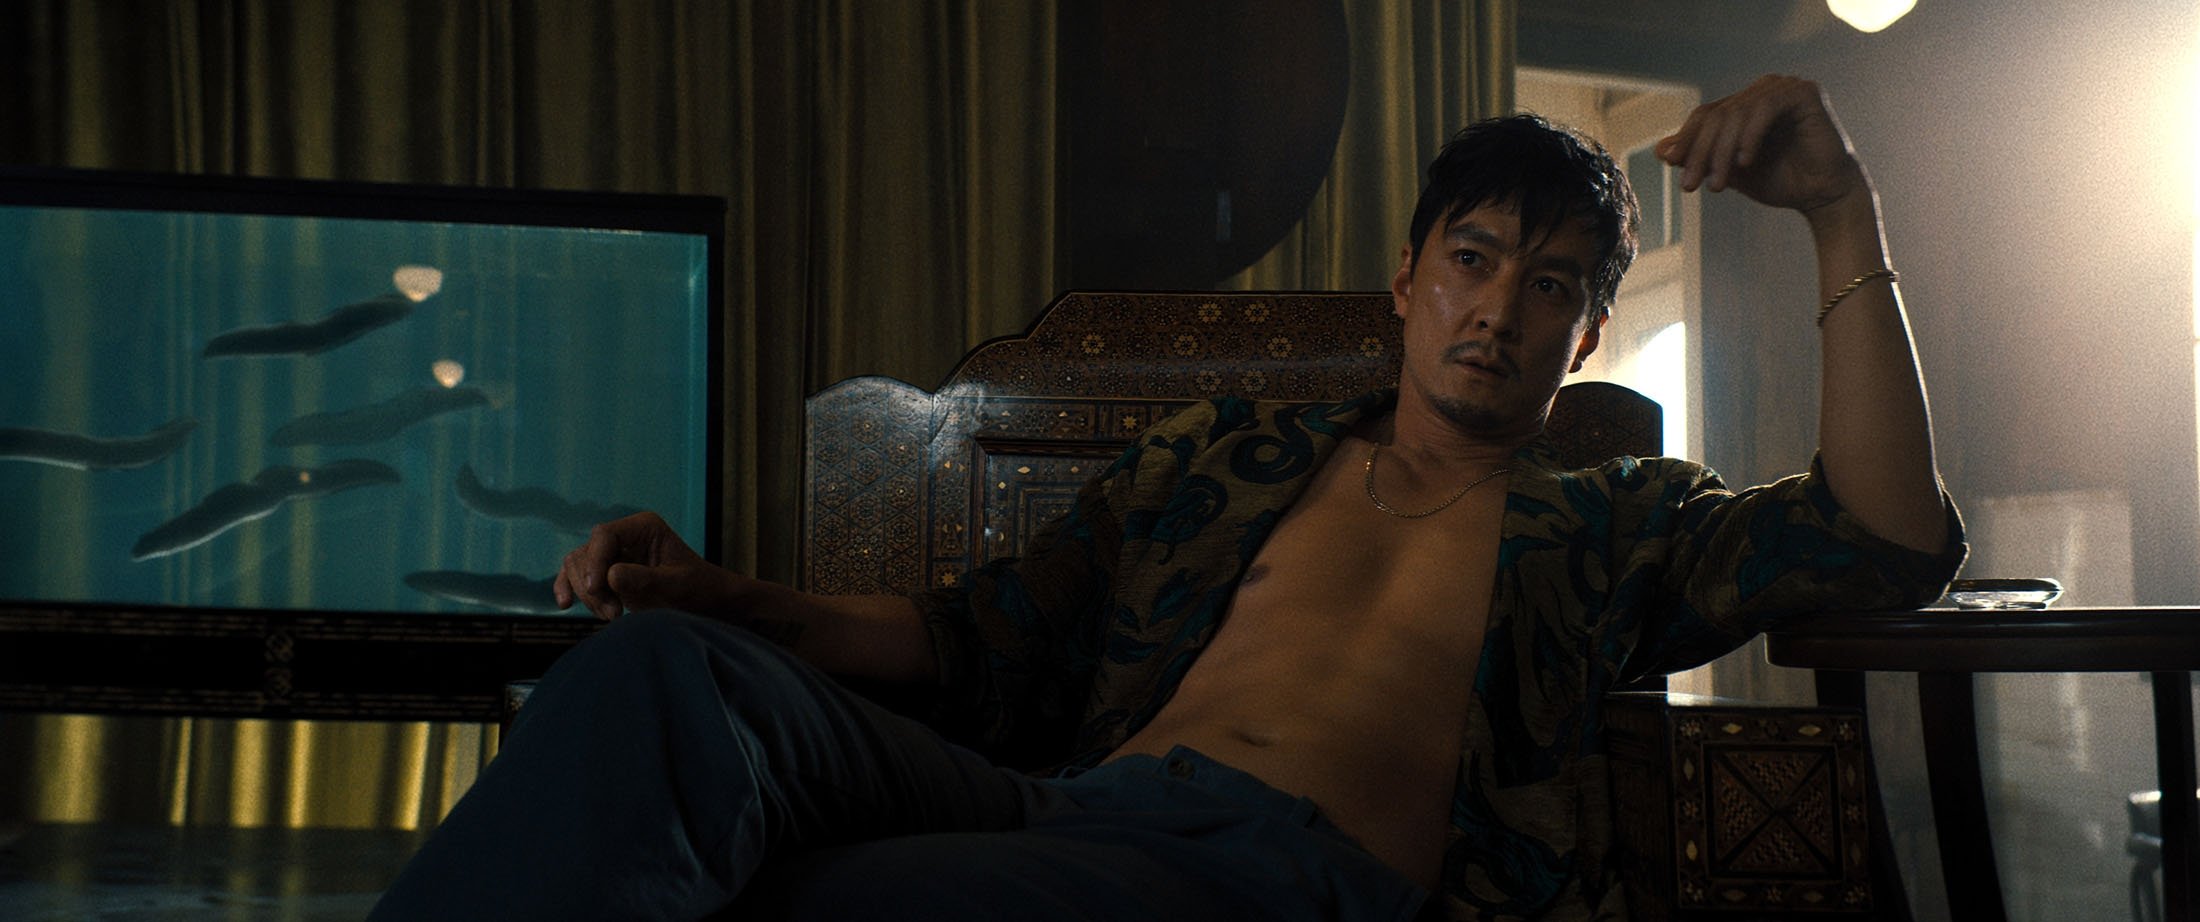 Daniel Wu in a scene from the film "Reminiscence." (Warner Bros. Pictures via AP)